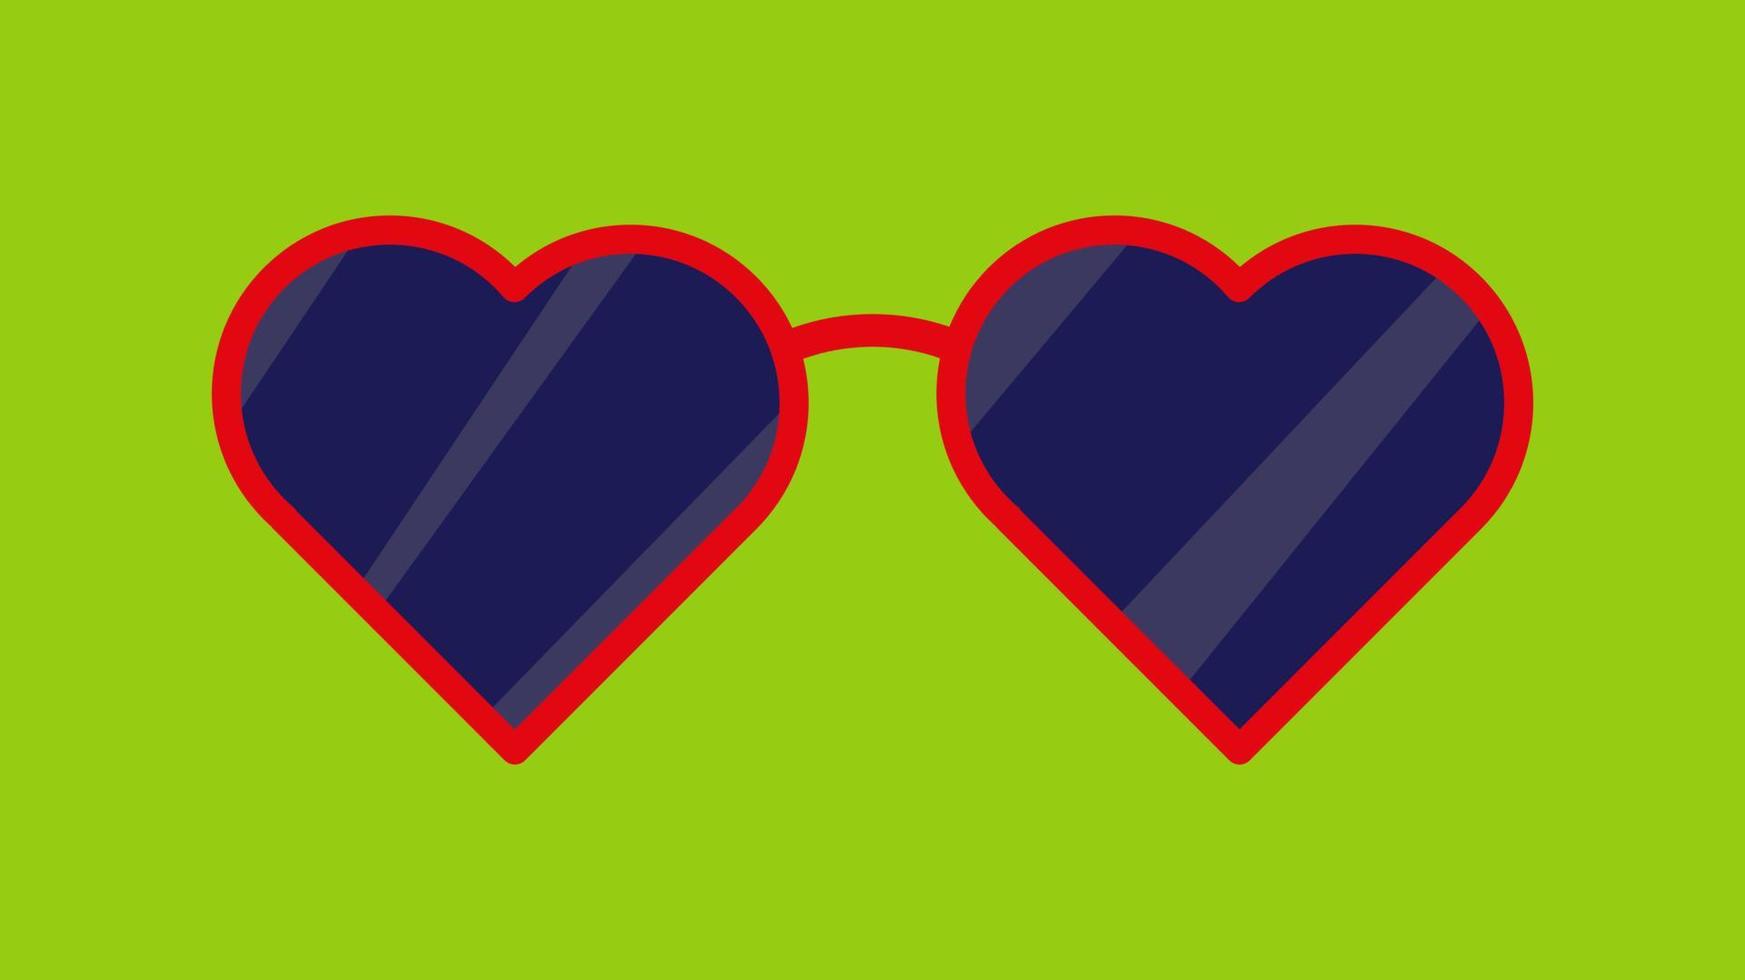 A vector illustration of red heart shaped sunglasses with shadows on green background